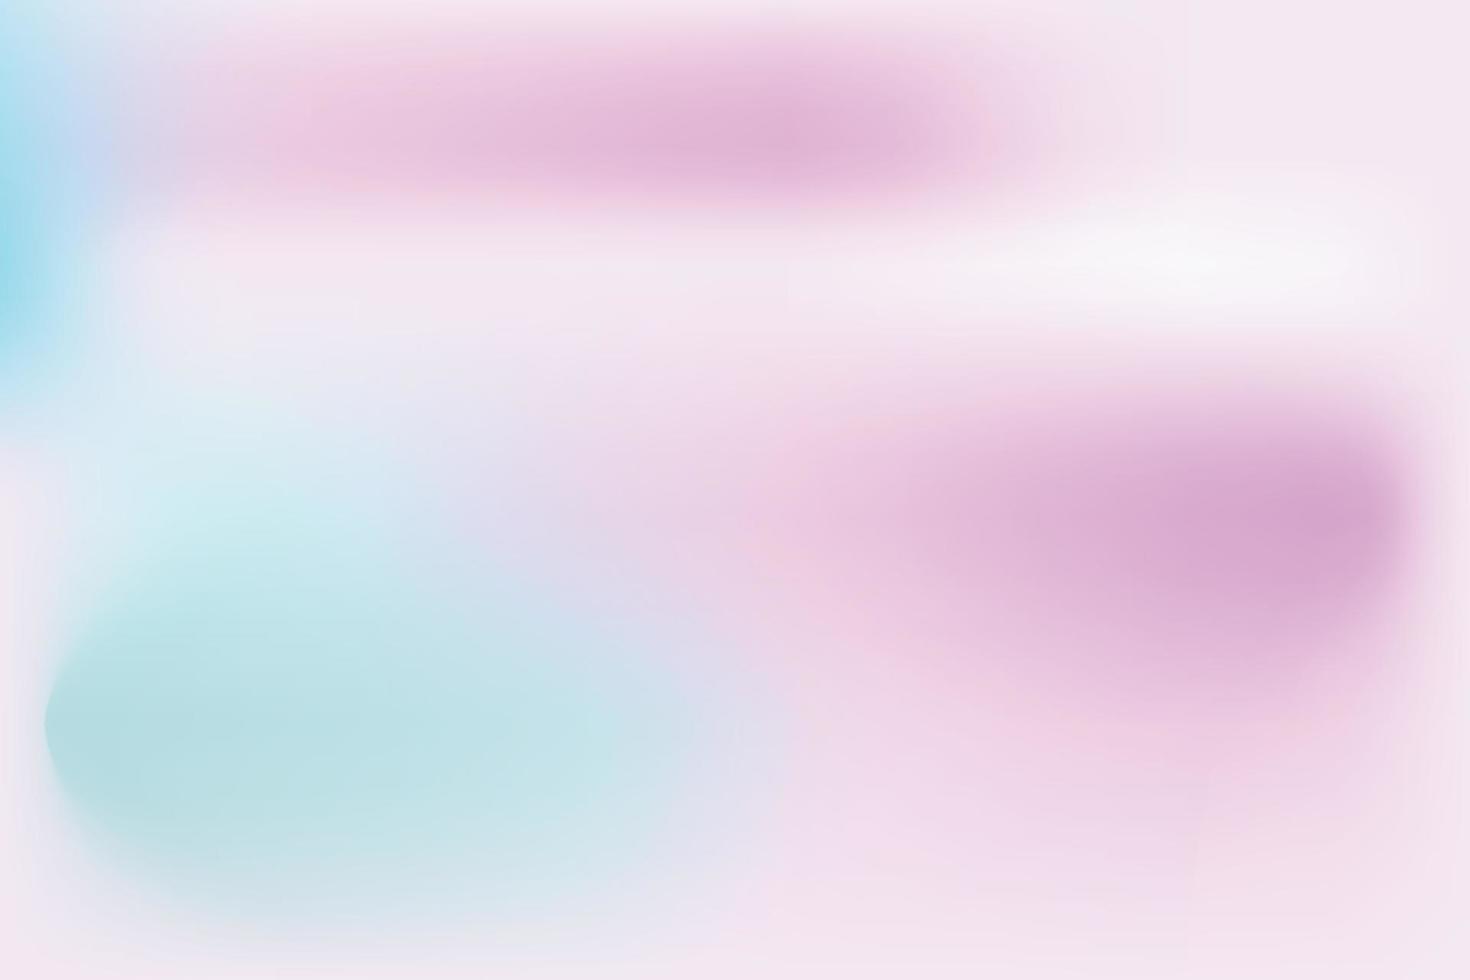 blur pink and blue dreamy background vector